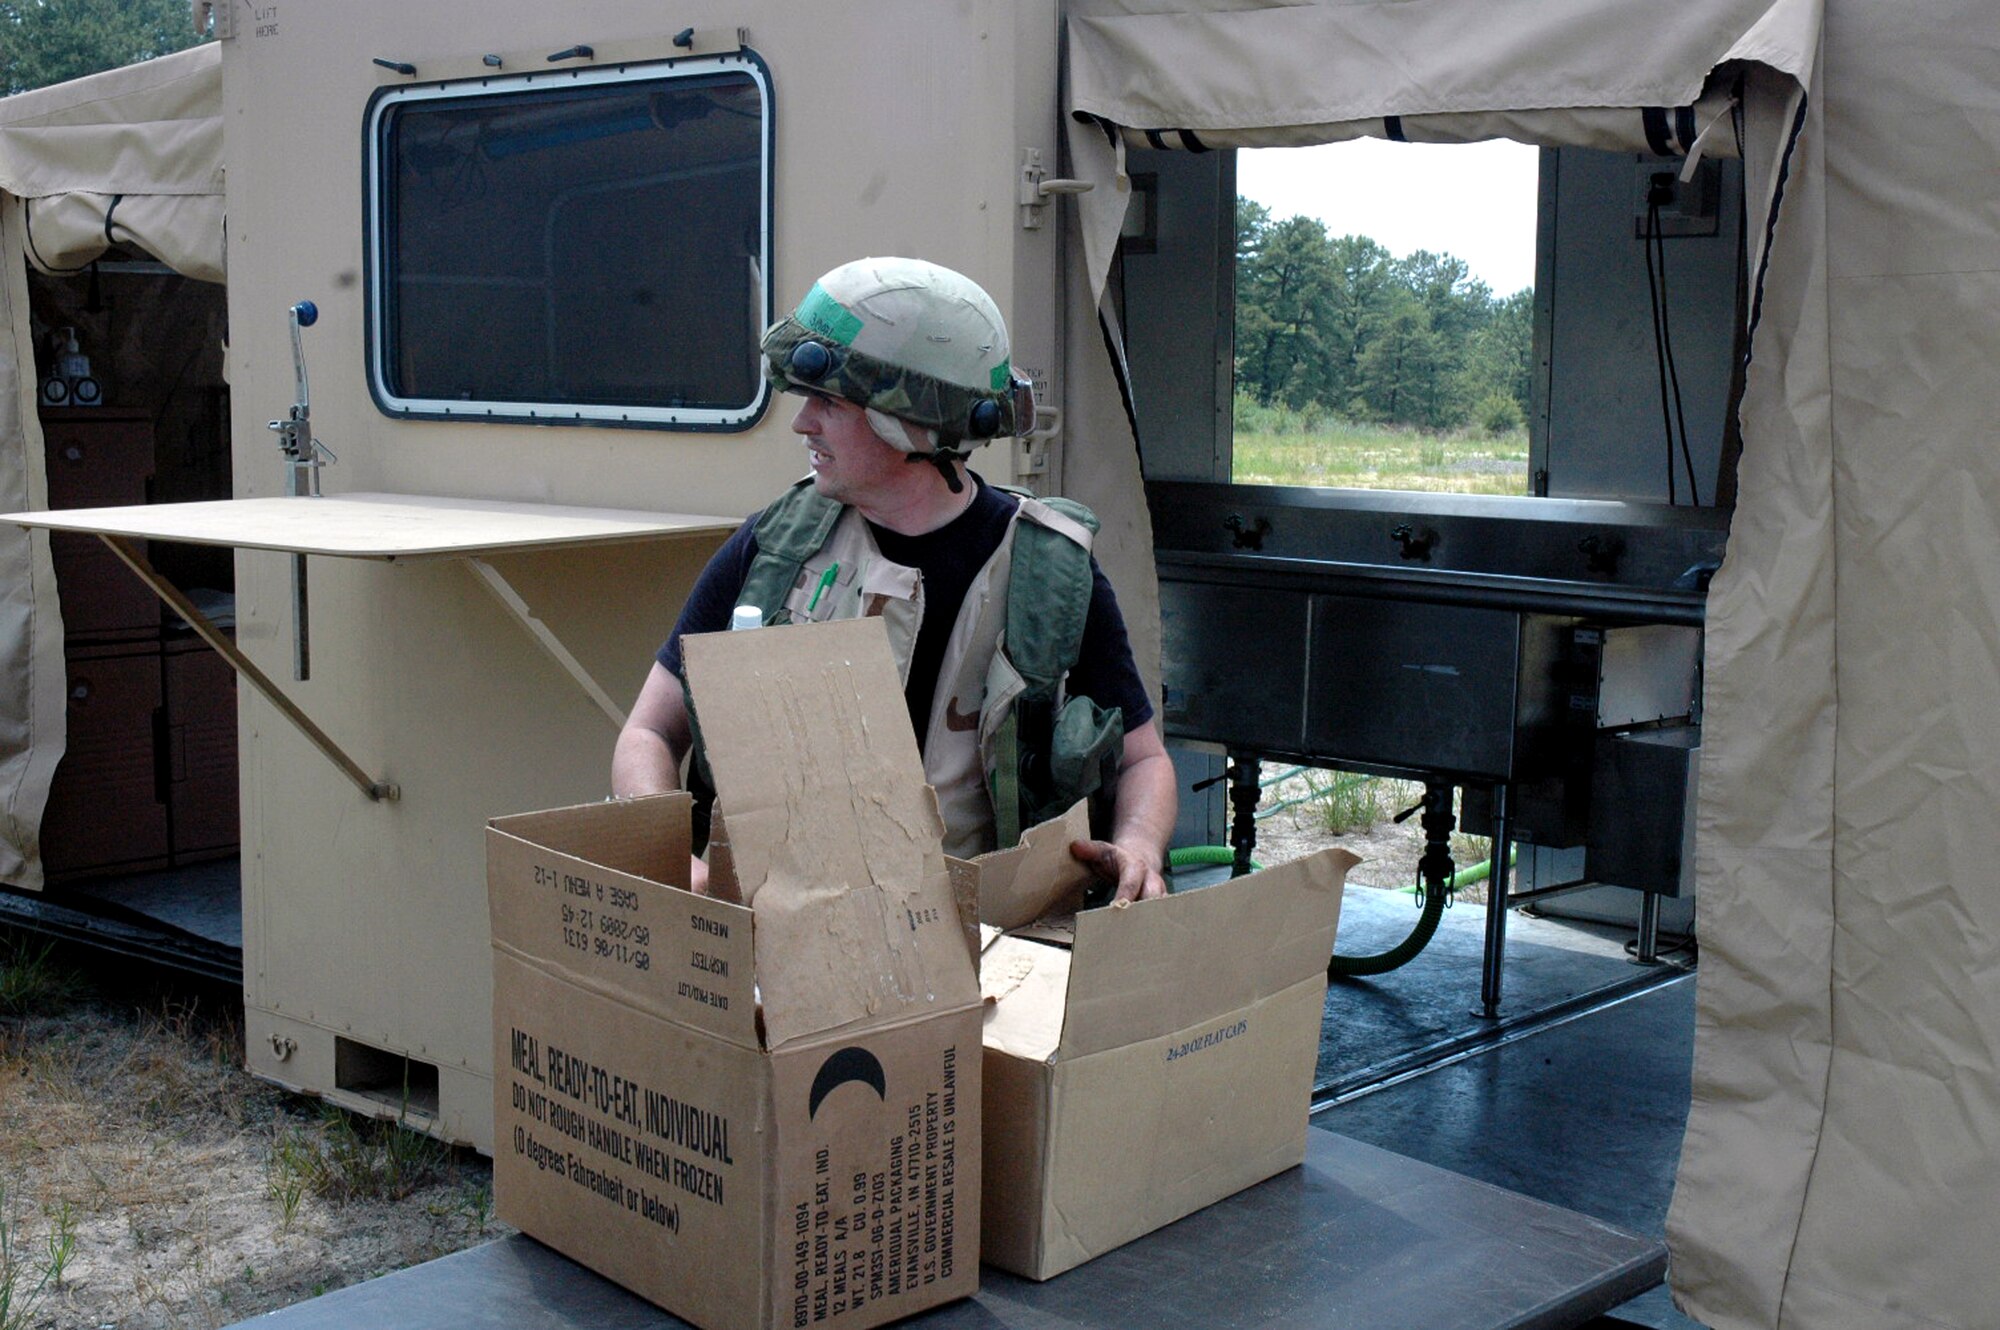 Staff Sgt. Lee Unick, from the 319th Force Support Squadron, Grand Forks Air Force Base, N.D., prepares boxes of meals-ready-to-eat, or MREs, for students deployed to Air Force Exercise Eagle Flag at Naval Air Engineering Station Lakehurst, N.J., June 21, 2008.  Eagle Flag is operated by the U.S. Air Force Expeditionary Center's Expeditionary Operations School and 421st Combat Training Squadron at Fort Dix, N.J.  The exercise tests and trains Airmen in expeditionary combat support skills.  (U.S. Air Force Photo/Tech. Sgt. Scott T. Sturkol)